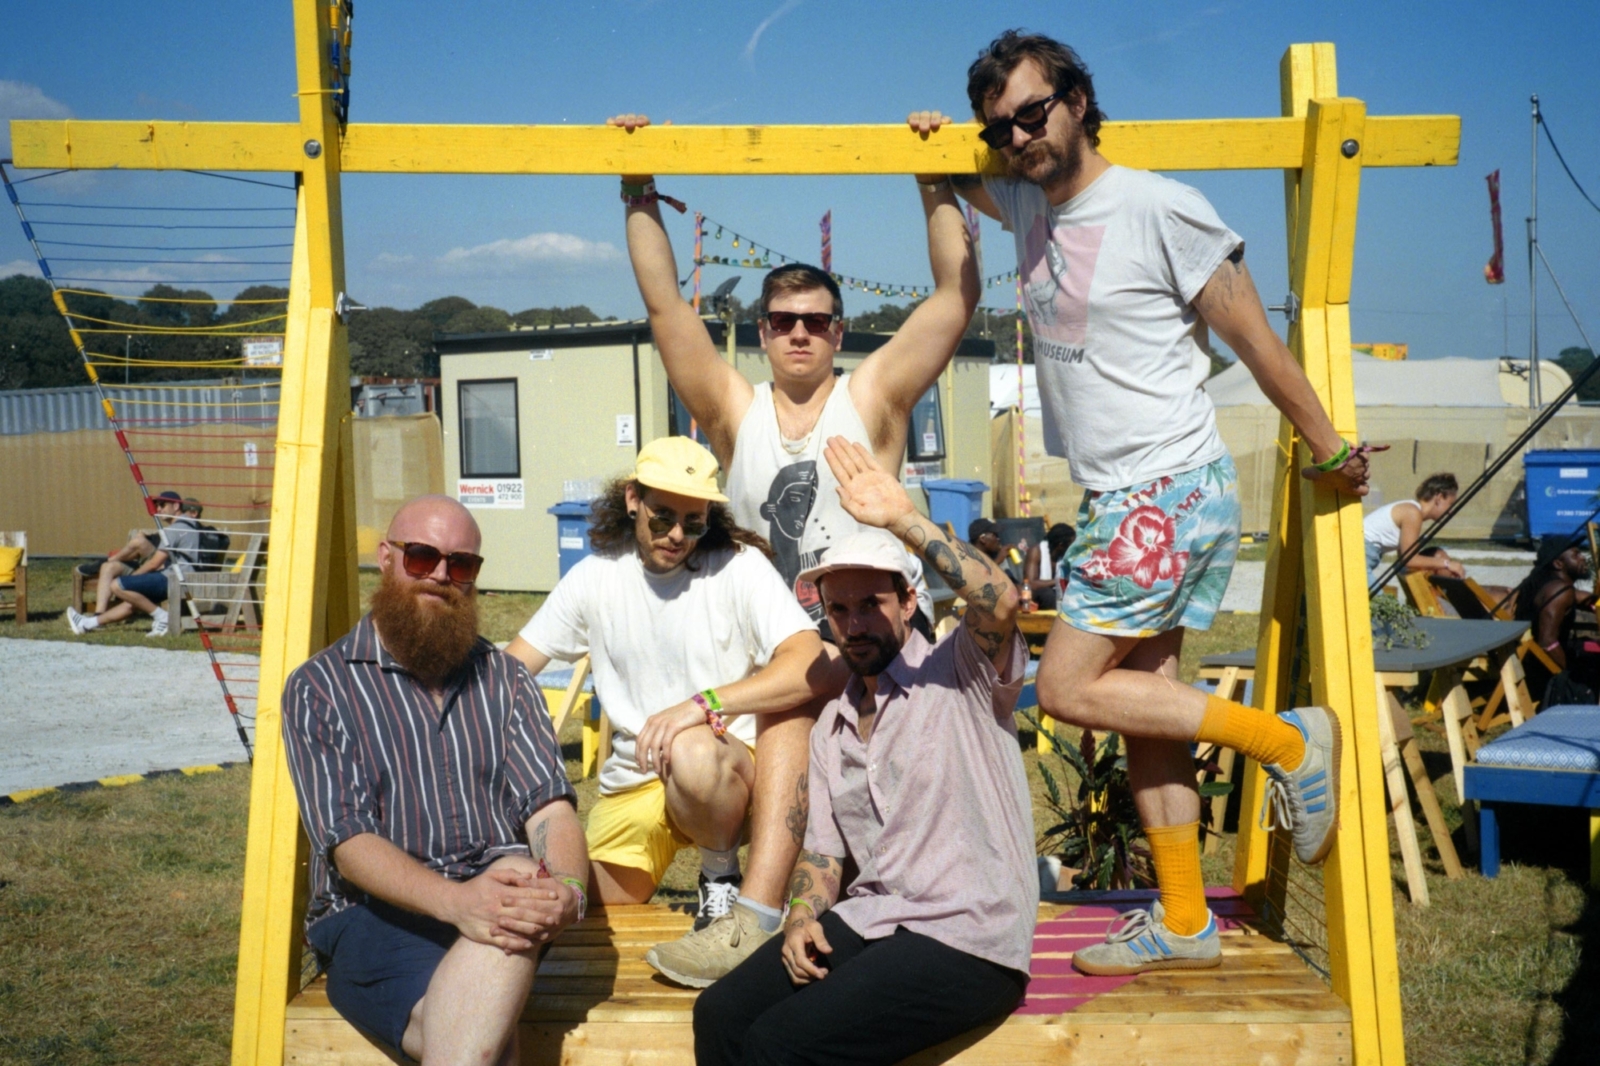 IDLES, Sundara Karma, Black Honey and more feature on the new DIY Podcast